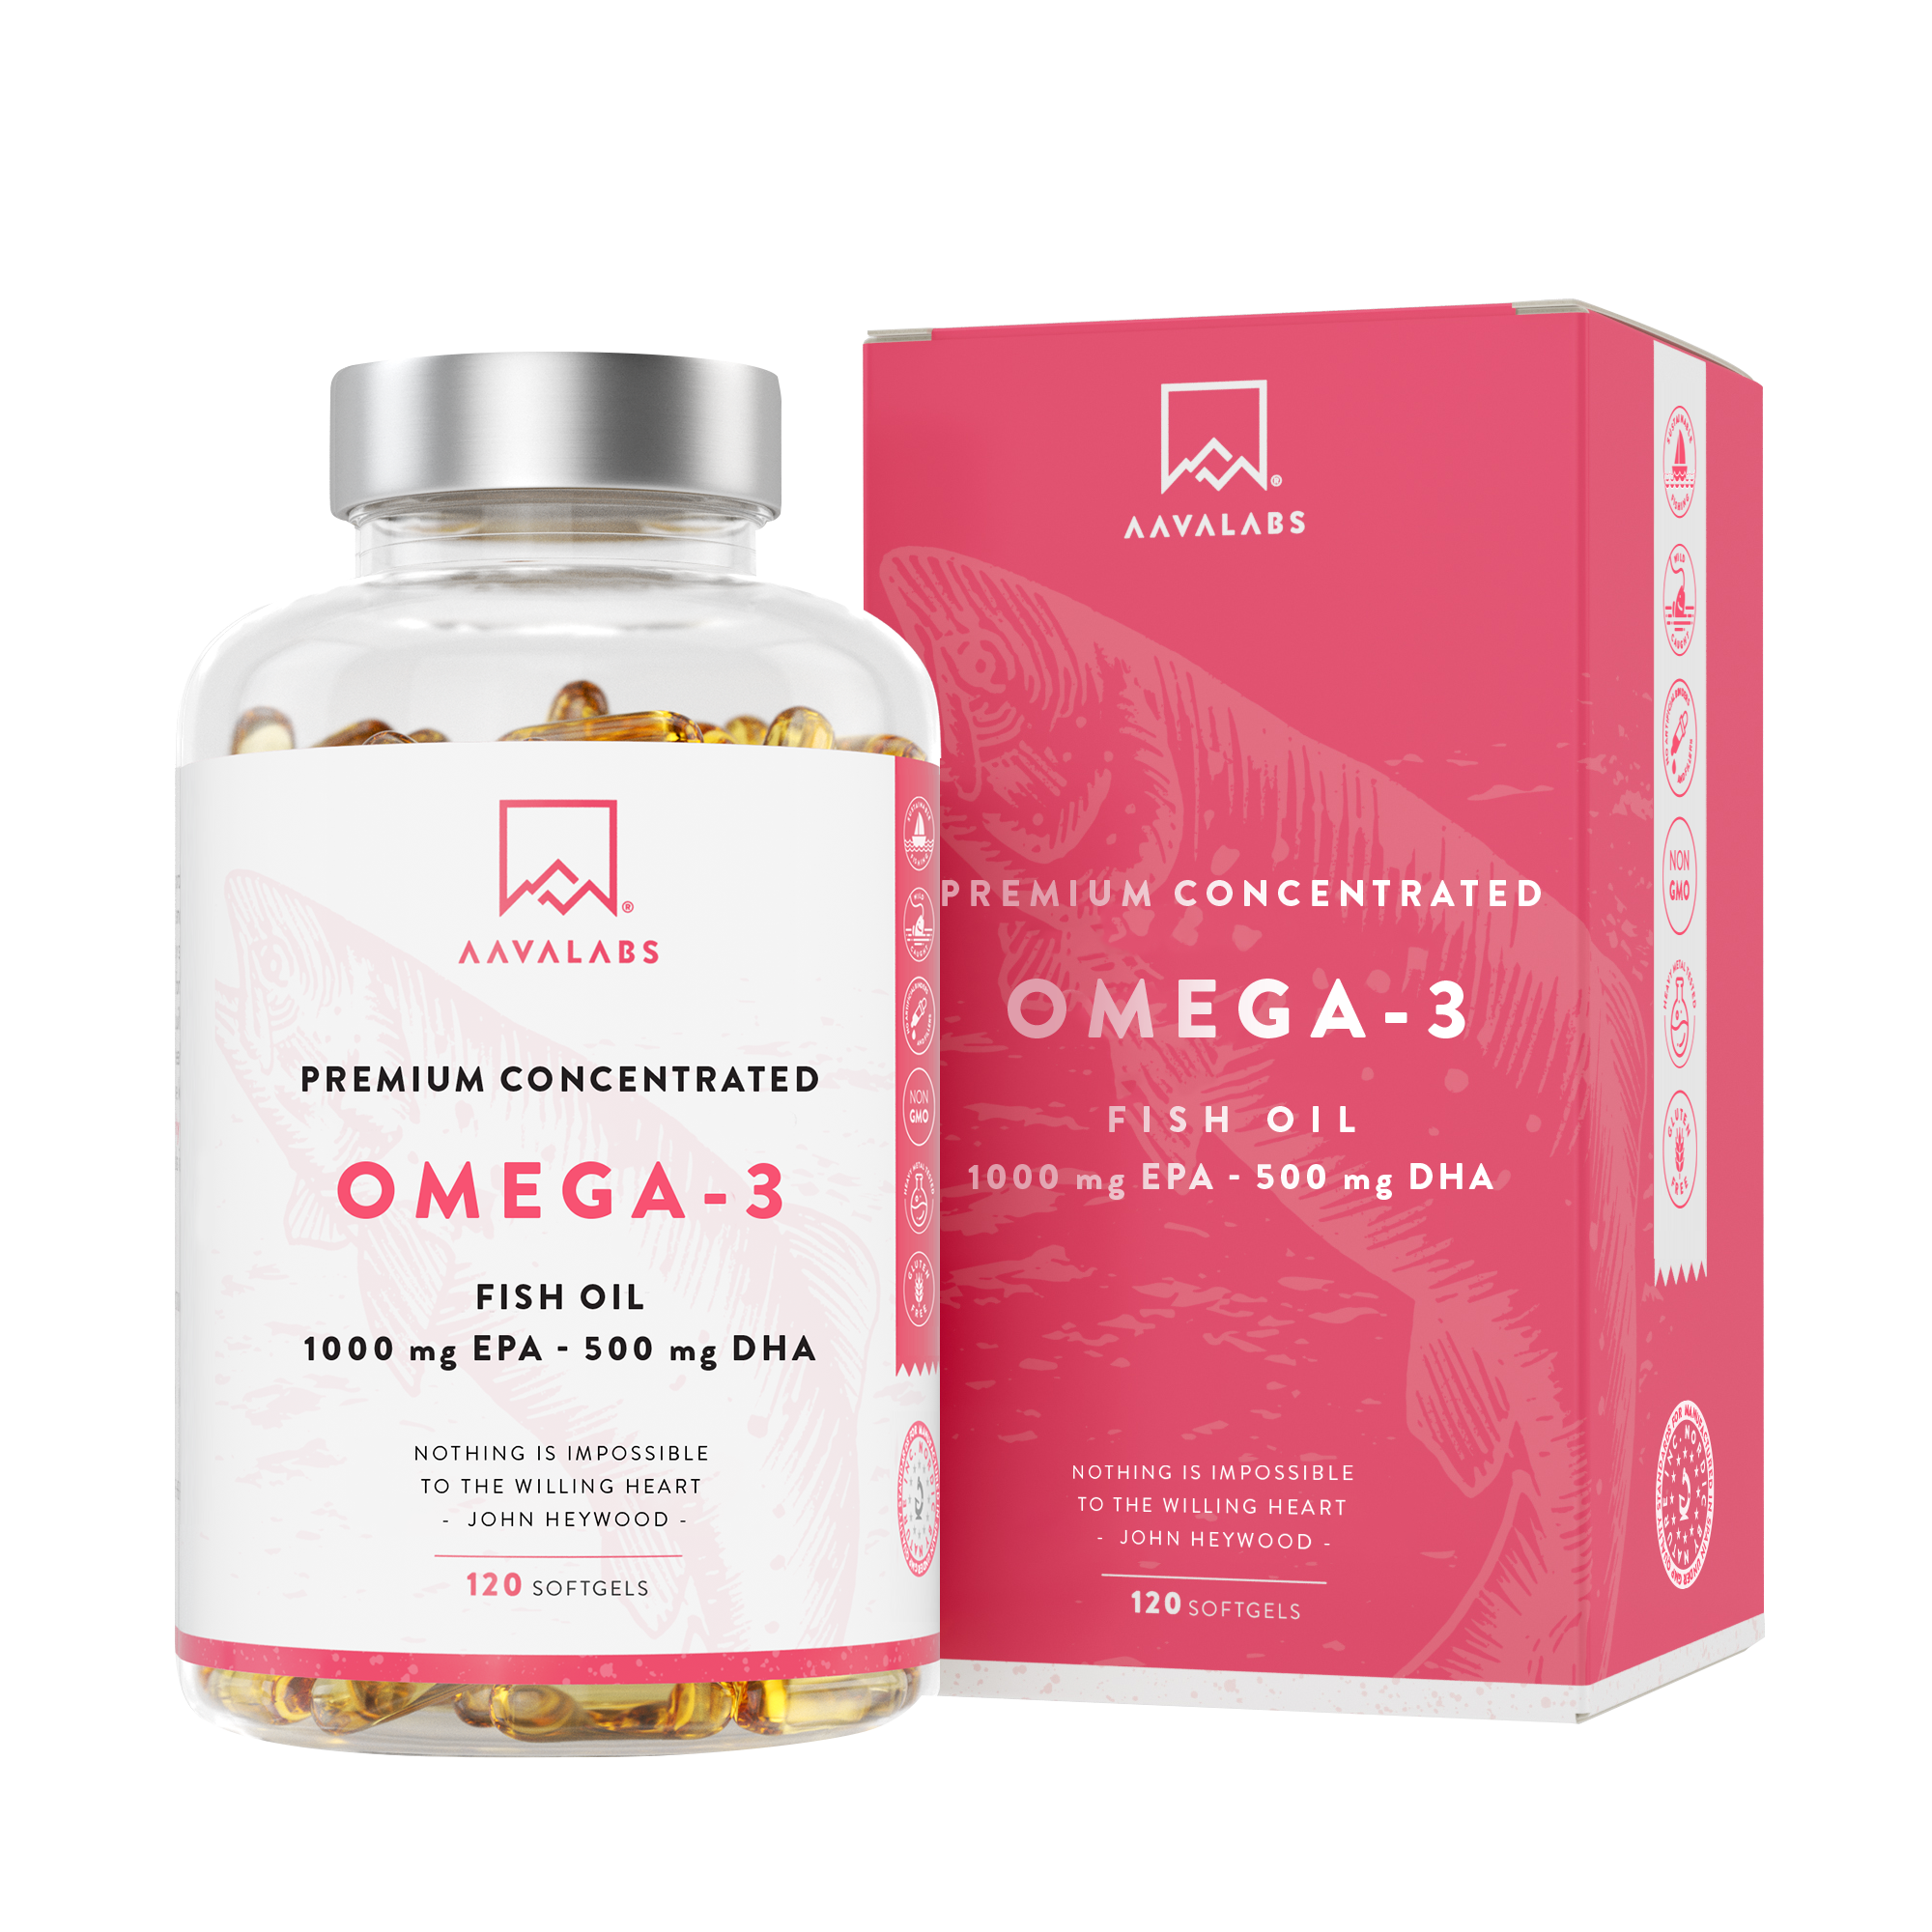 Omega-3 Fish Oil bottle and box - AAVALABS